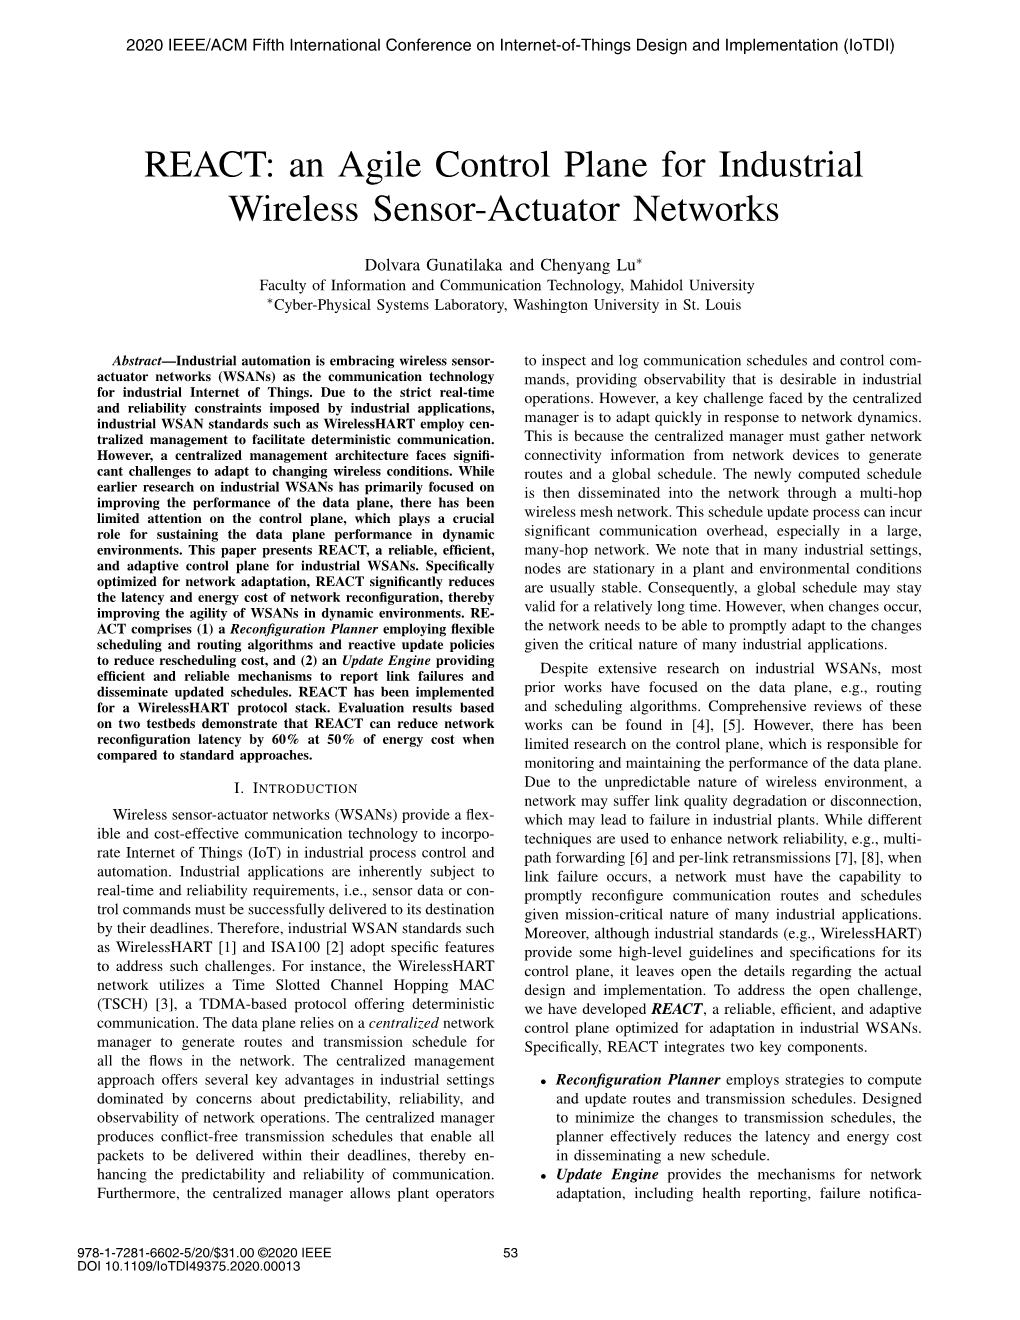 An Agile Control Plane for Industrial Wireless Sensor-Actuator Networks